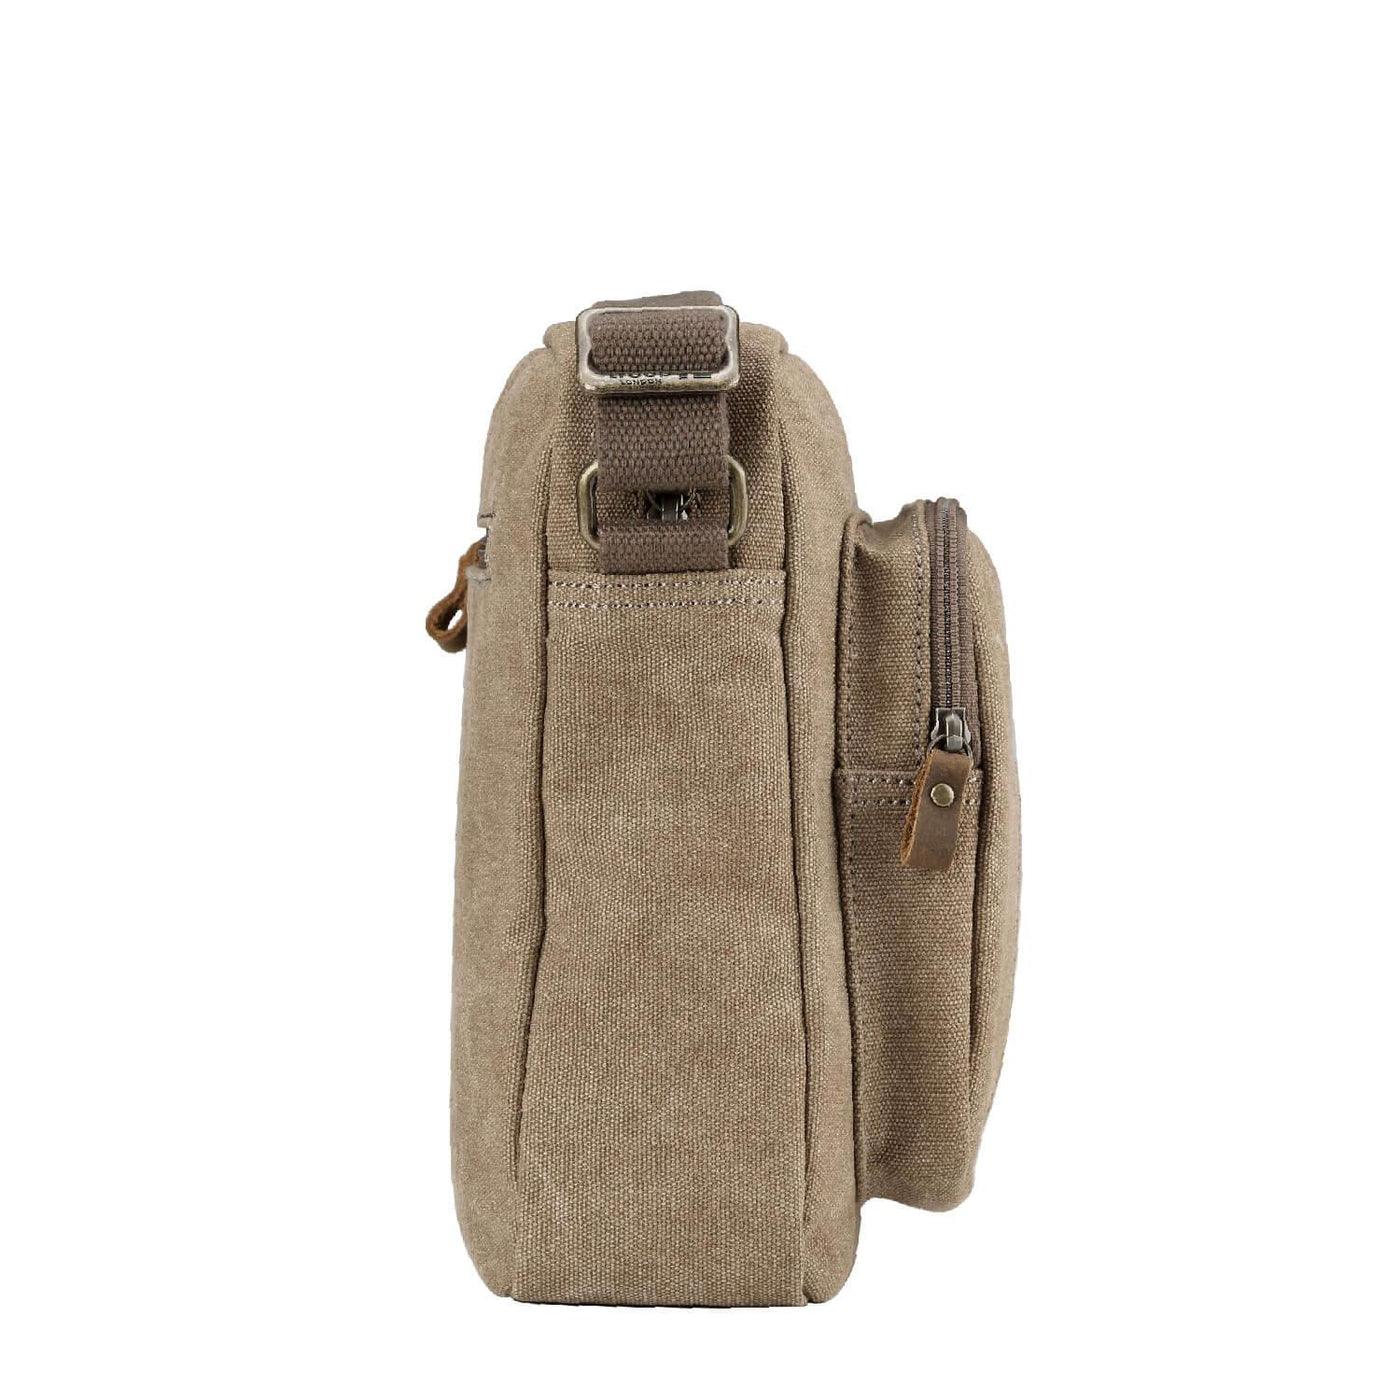 CLASSIC CANVAS ACROSS BODY BAG - TRP0234 - BROWN - RUTHERFORD & Co